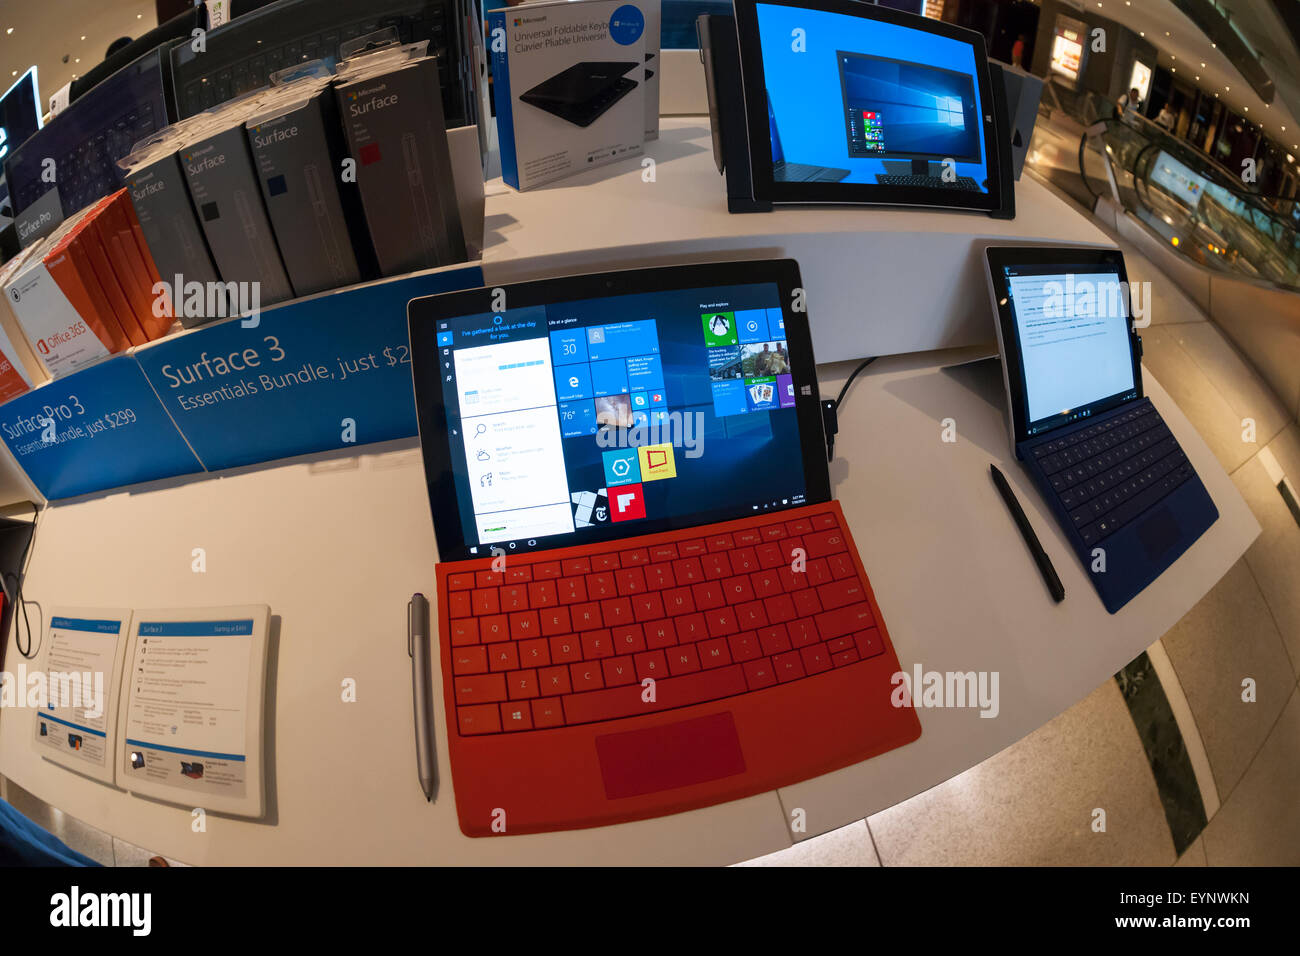 Windows 10 is seen running on a Surface computer at a Microsoft kiosk in the Time Warner Center in New York on Thursday, July 30, 2015. Windows 10 was released as a free upgrade with minimal hoopla yesterday. (© Richard B. Levine) Stock Photo